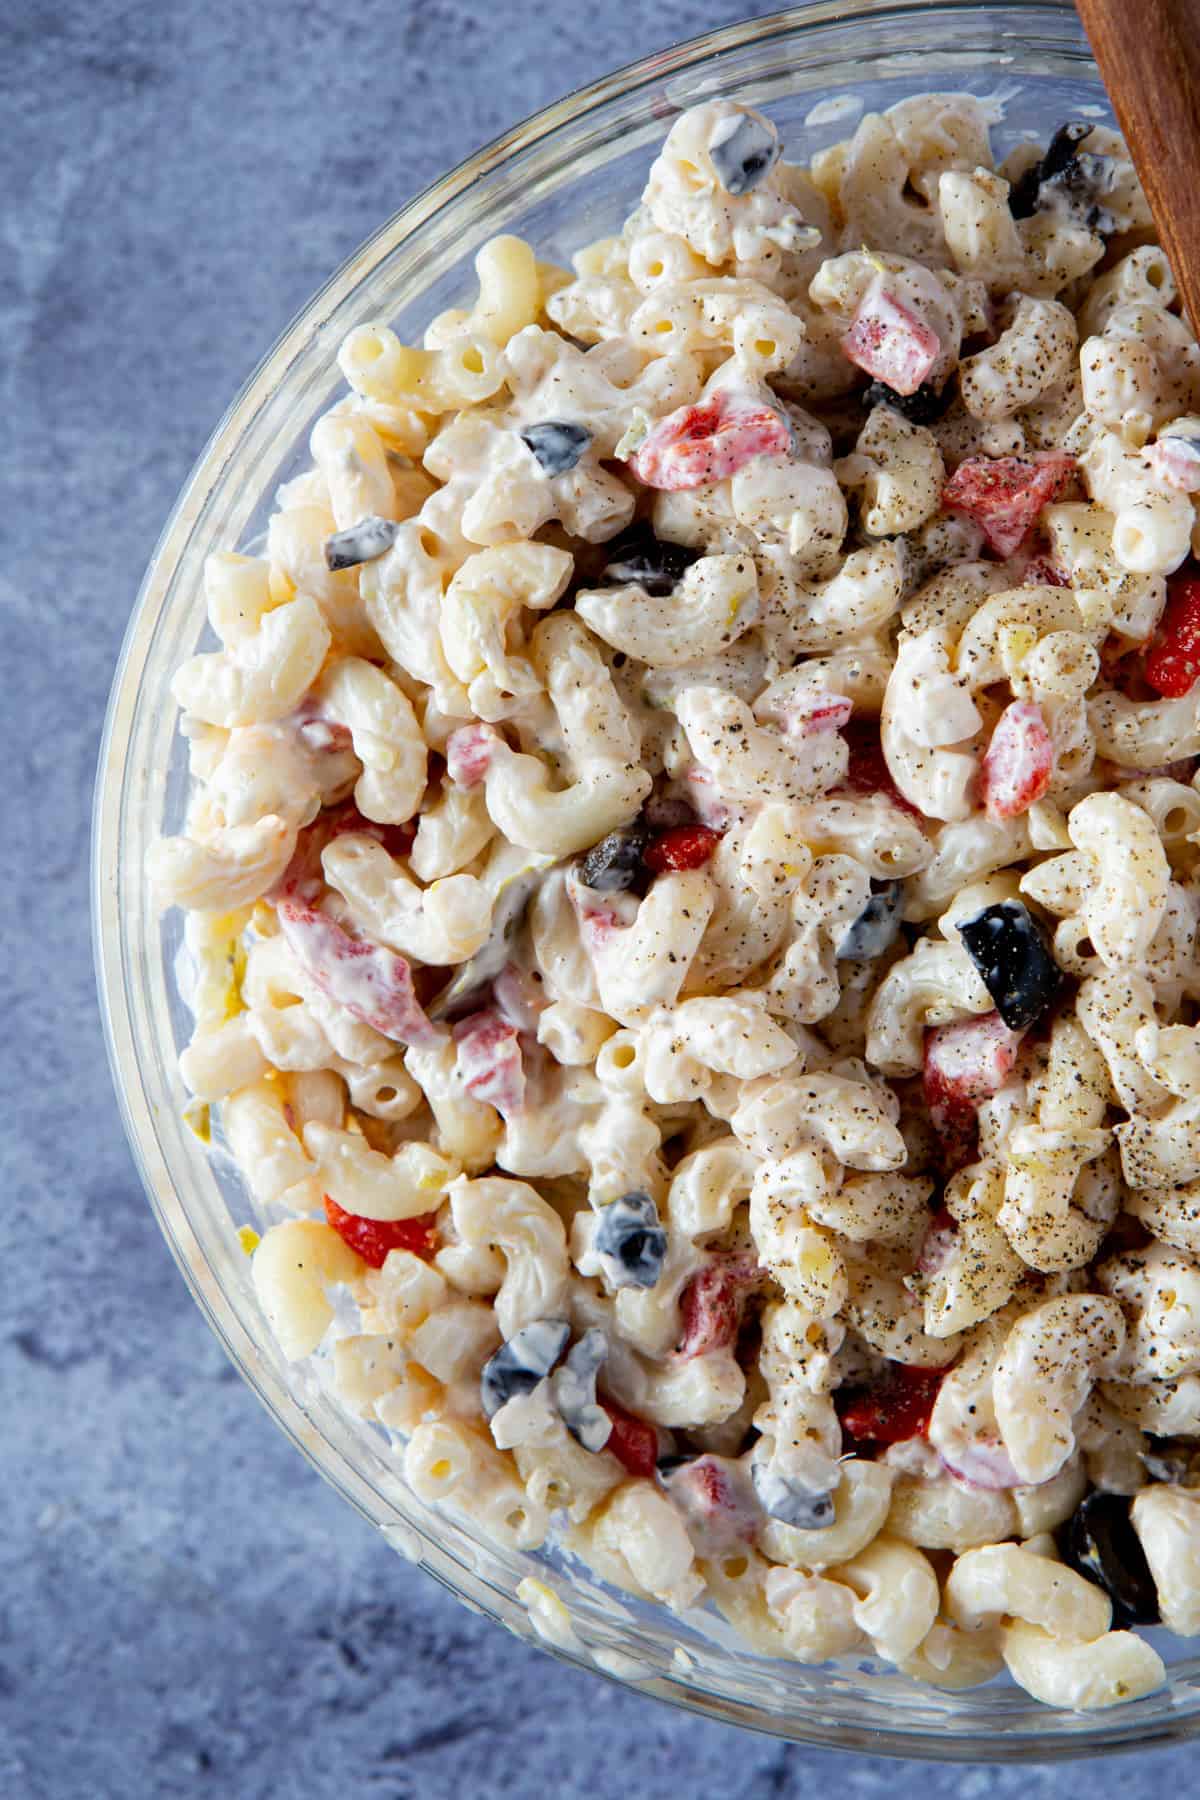 Bowl of macaroni salad with black olives, red peppers, and topped with black pepper.